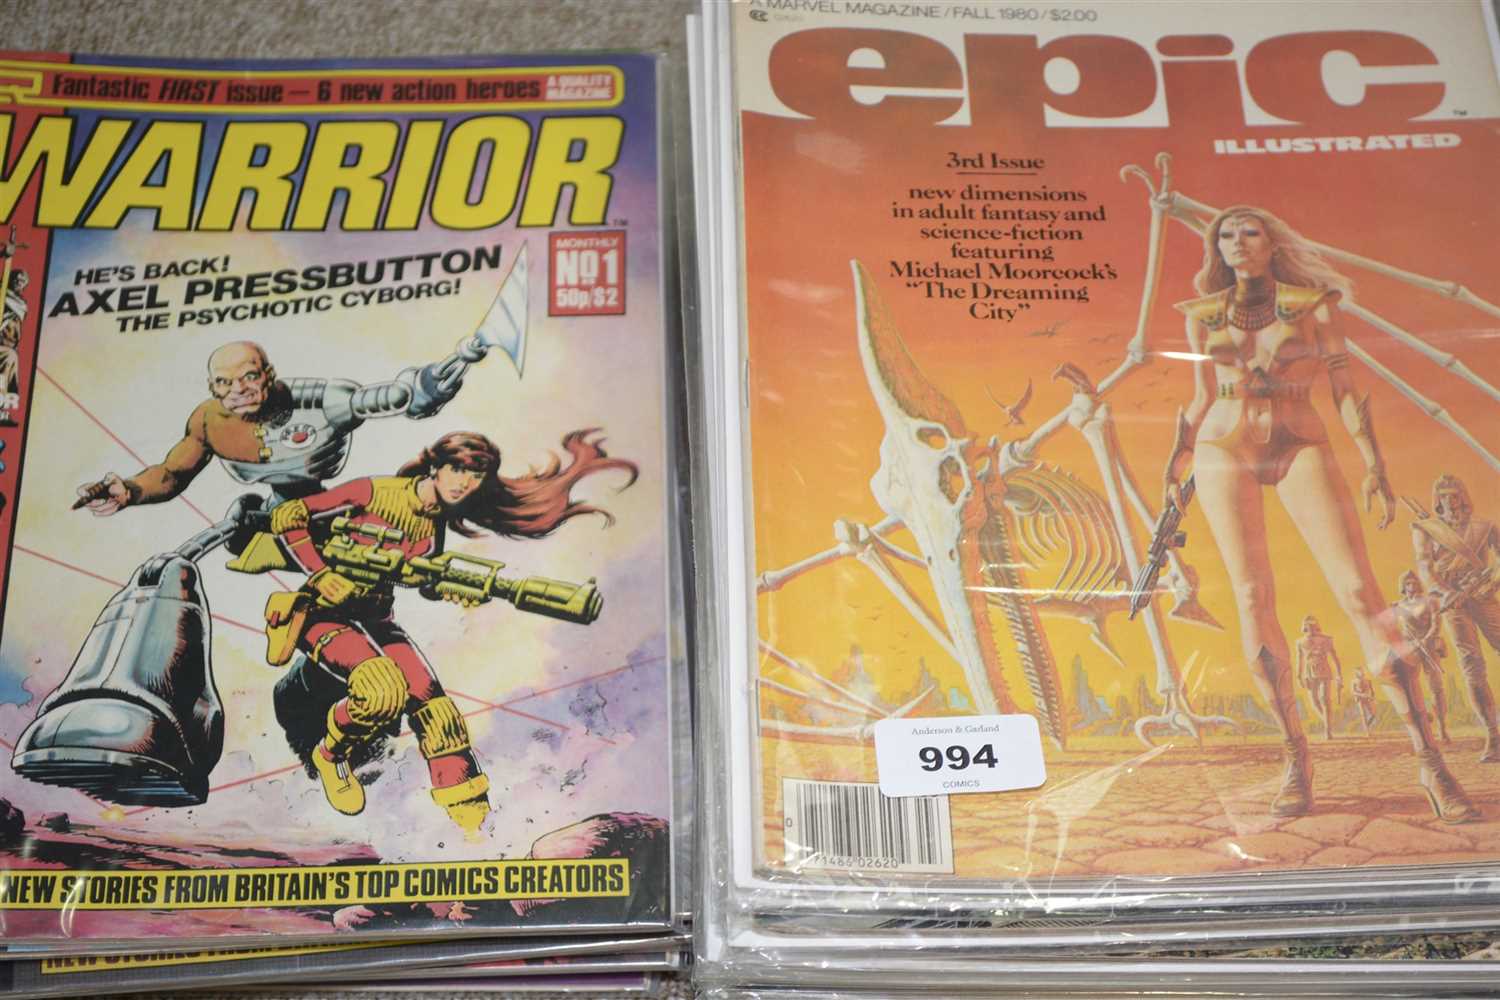 Lot 994 - Epic illustrated Marvel magazine fall 1980 and...